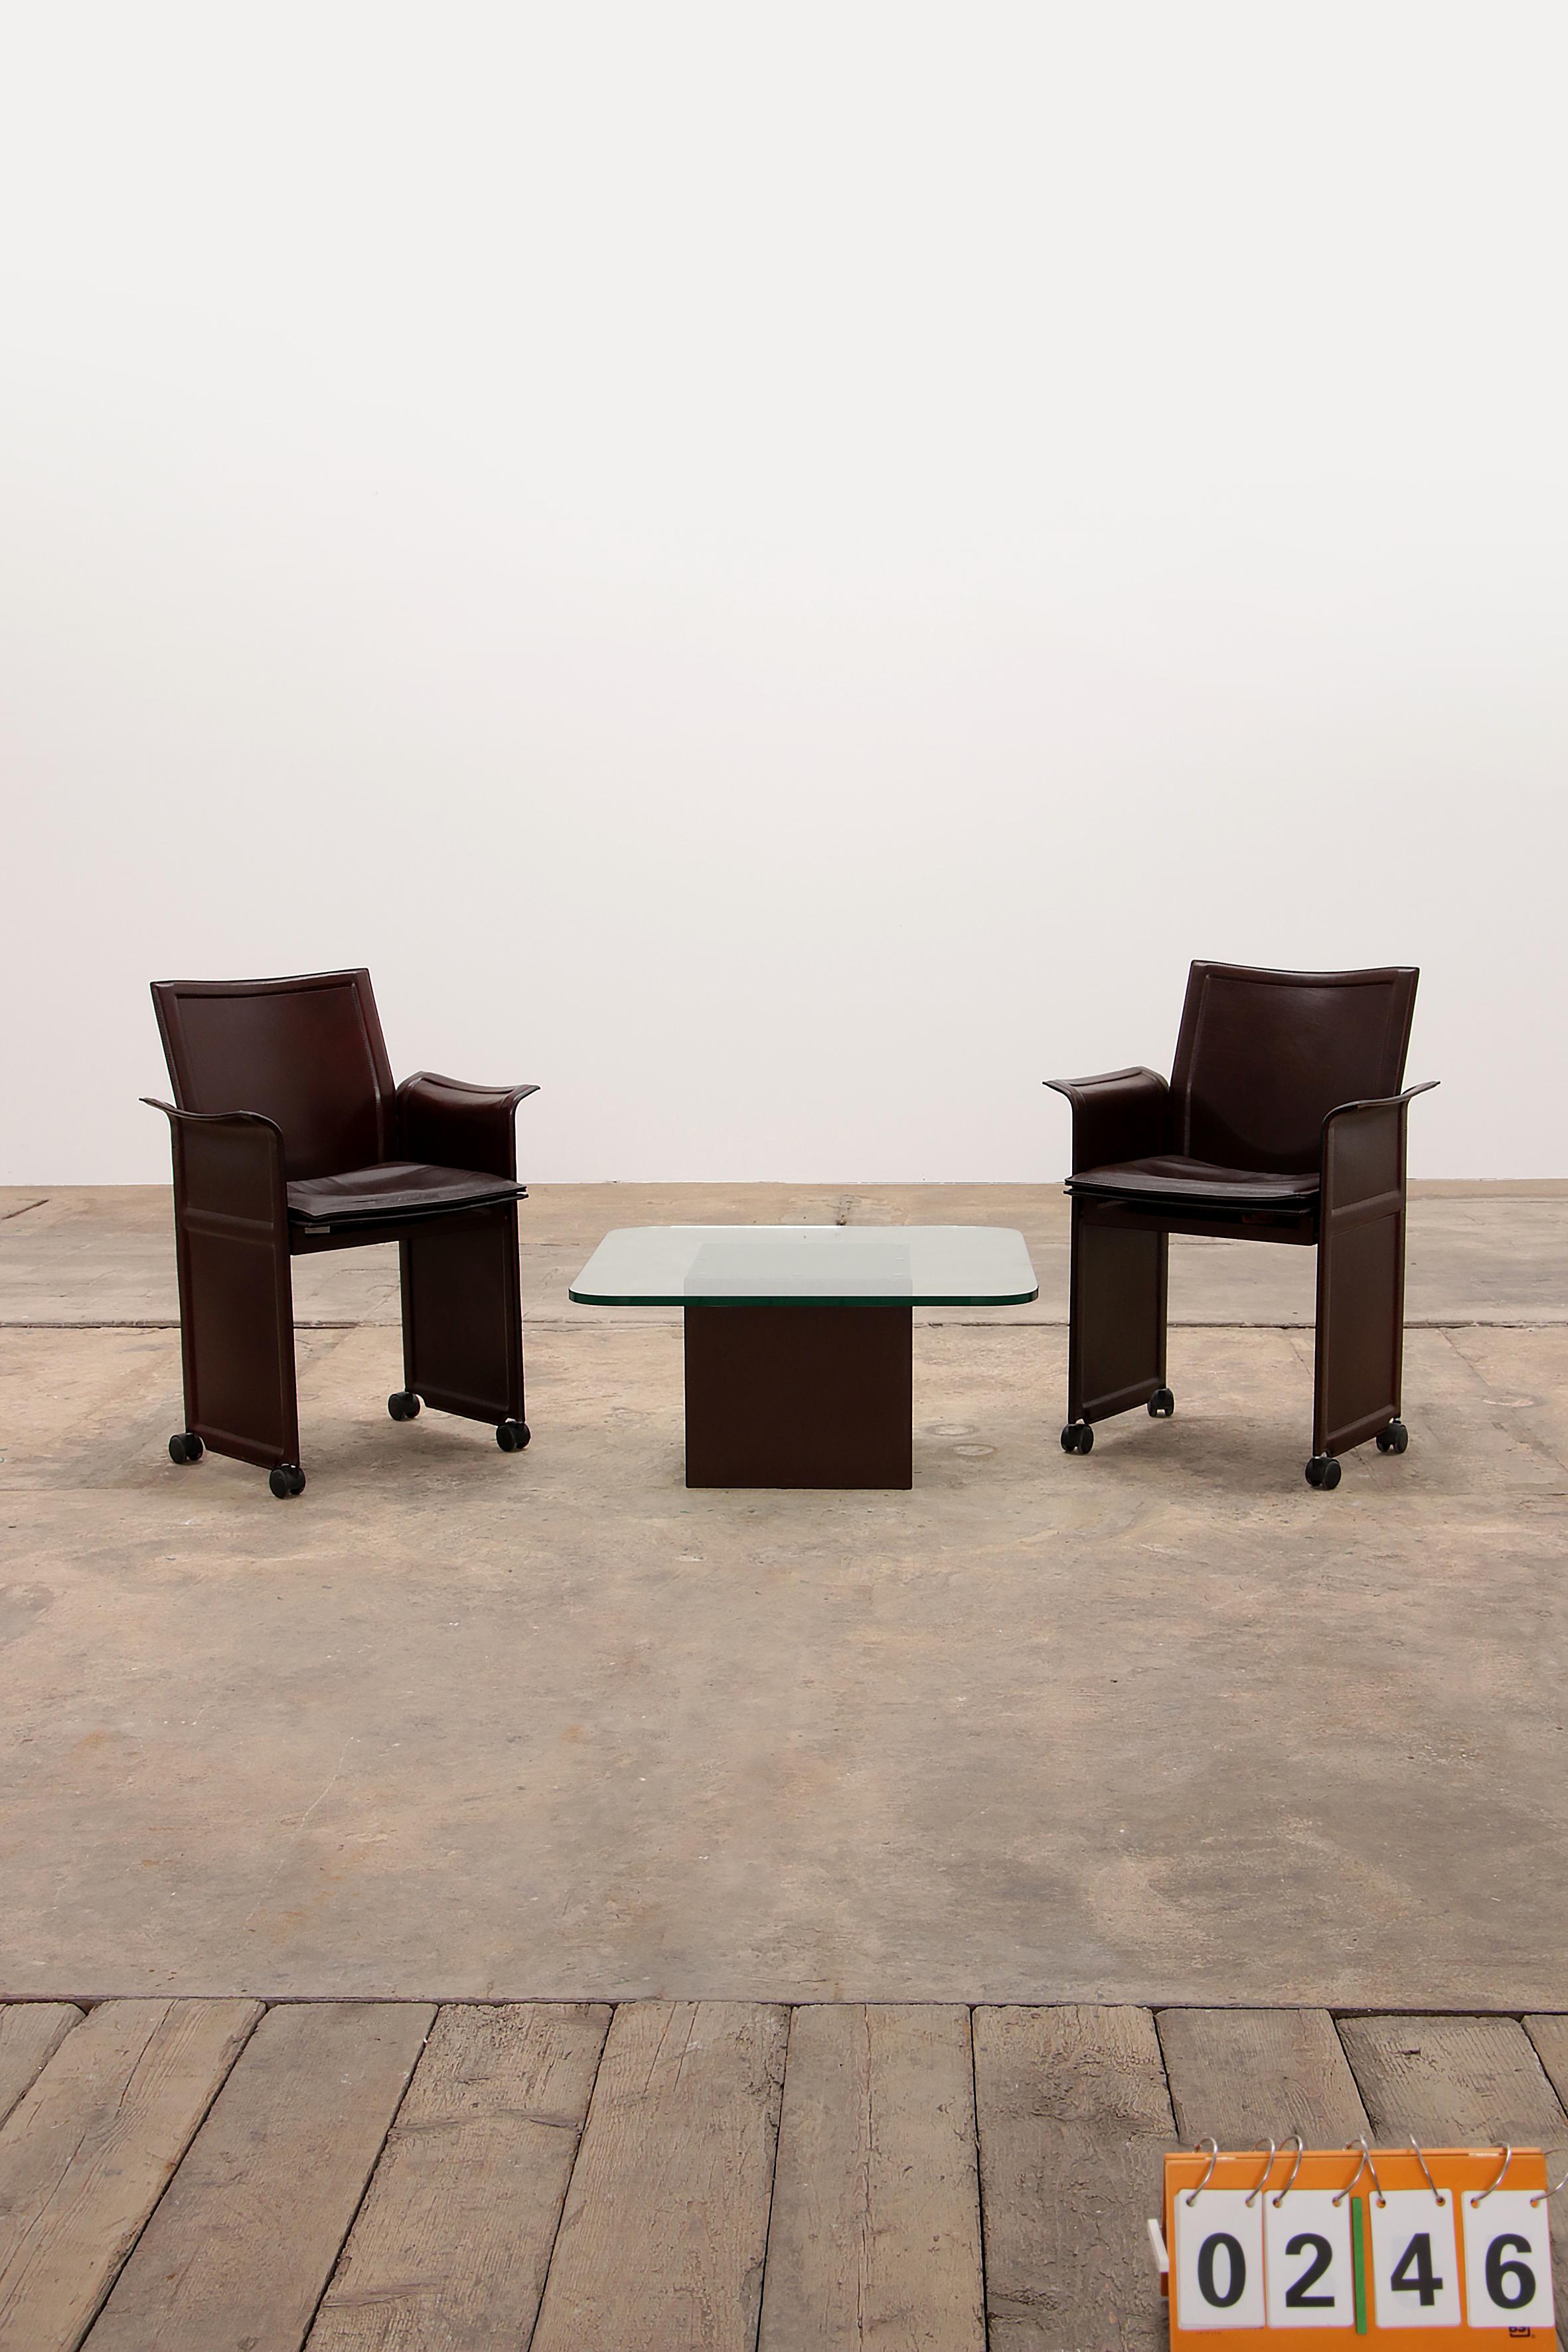 Tito Agnoli by Matteo Grassi Coffee Table with Two Chairs, 1970 Italy For Sale 14